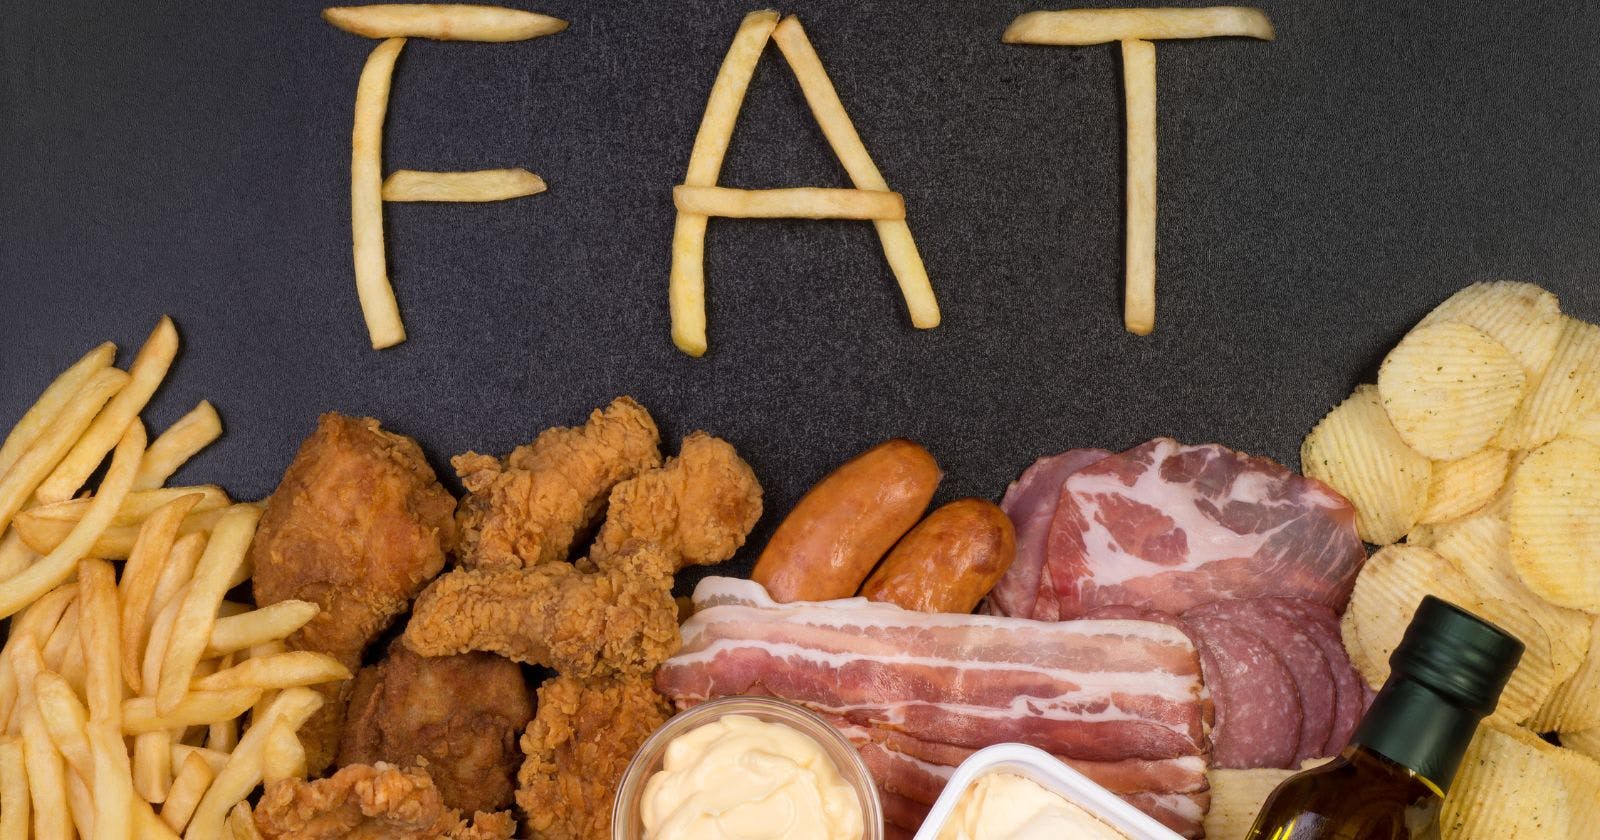 You Should Avoid Foods High in Fat From Your Diet